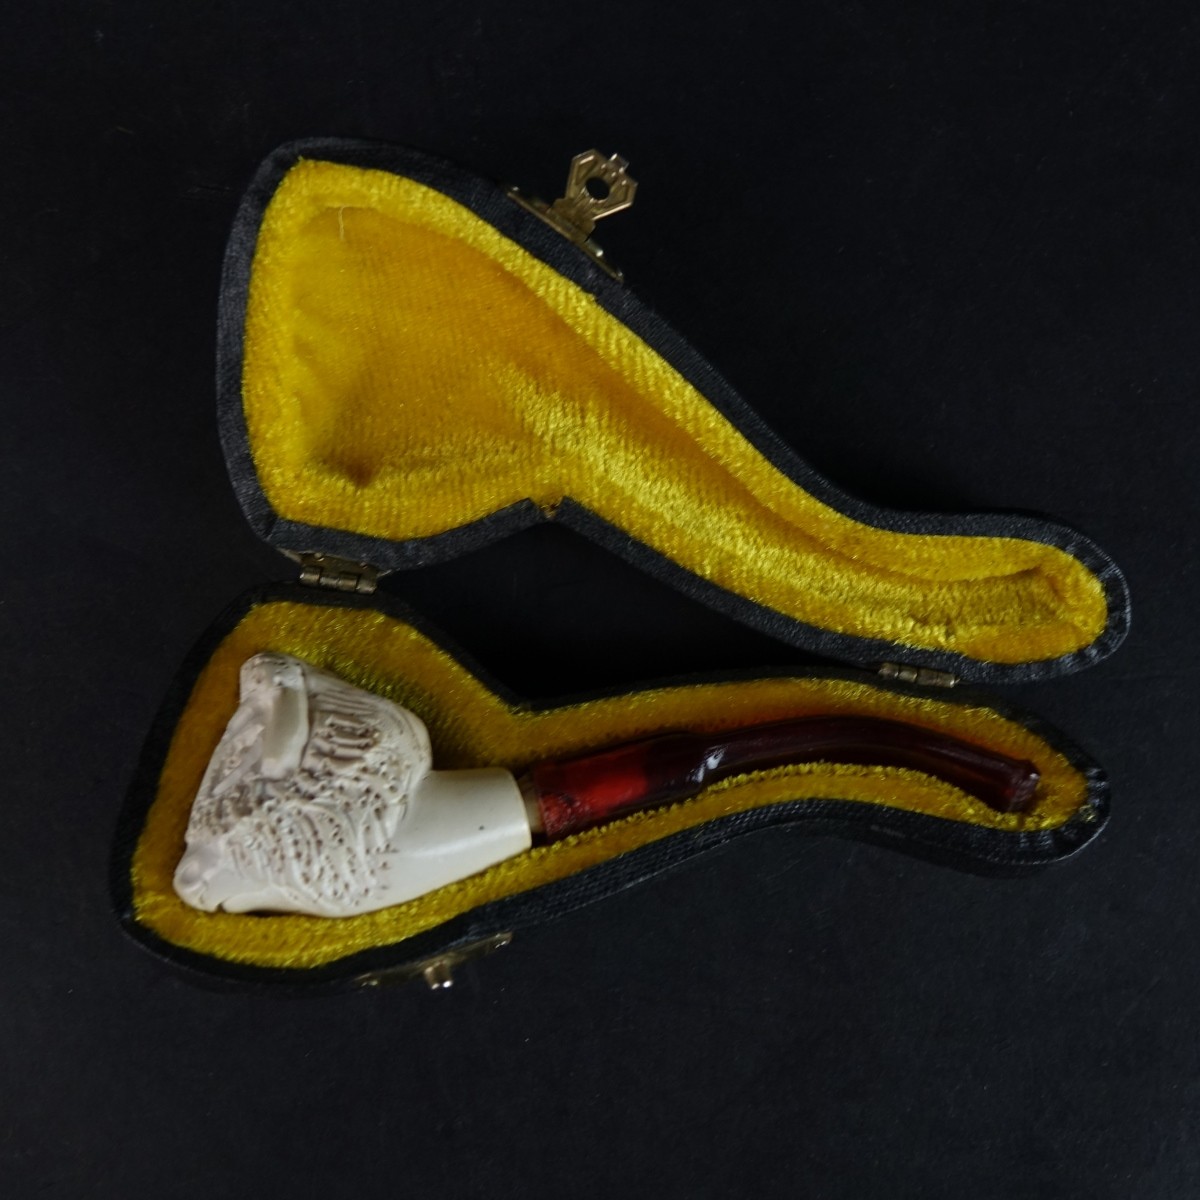 Antique Chinese Carving & Meerschaum Pipe